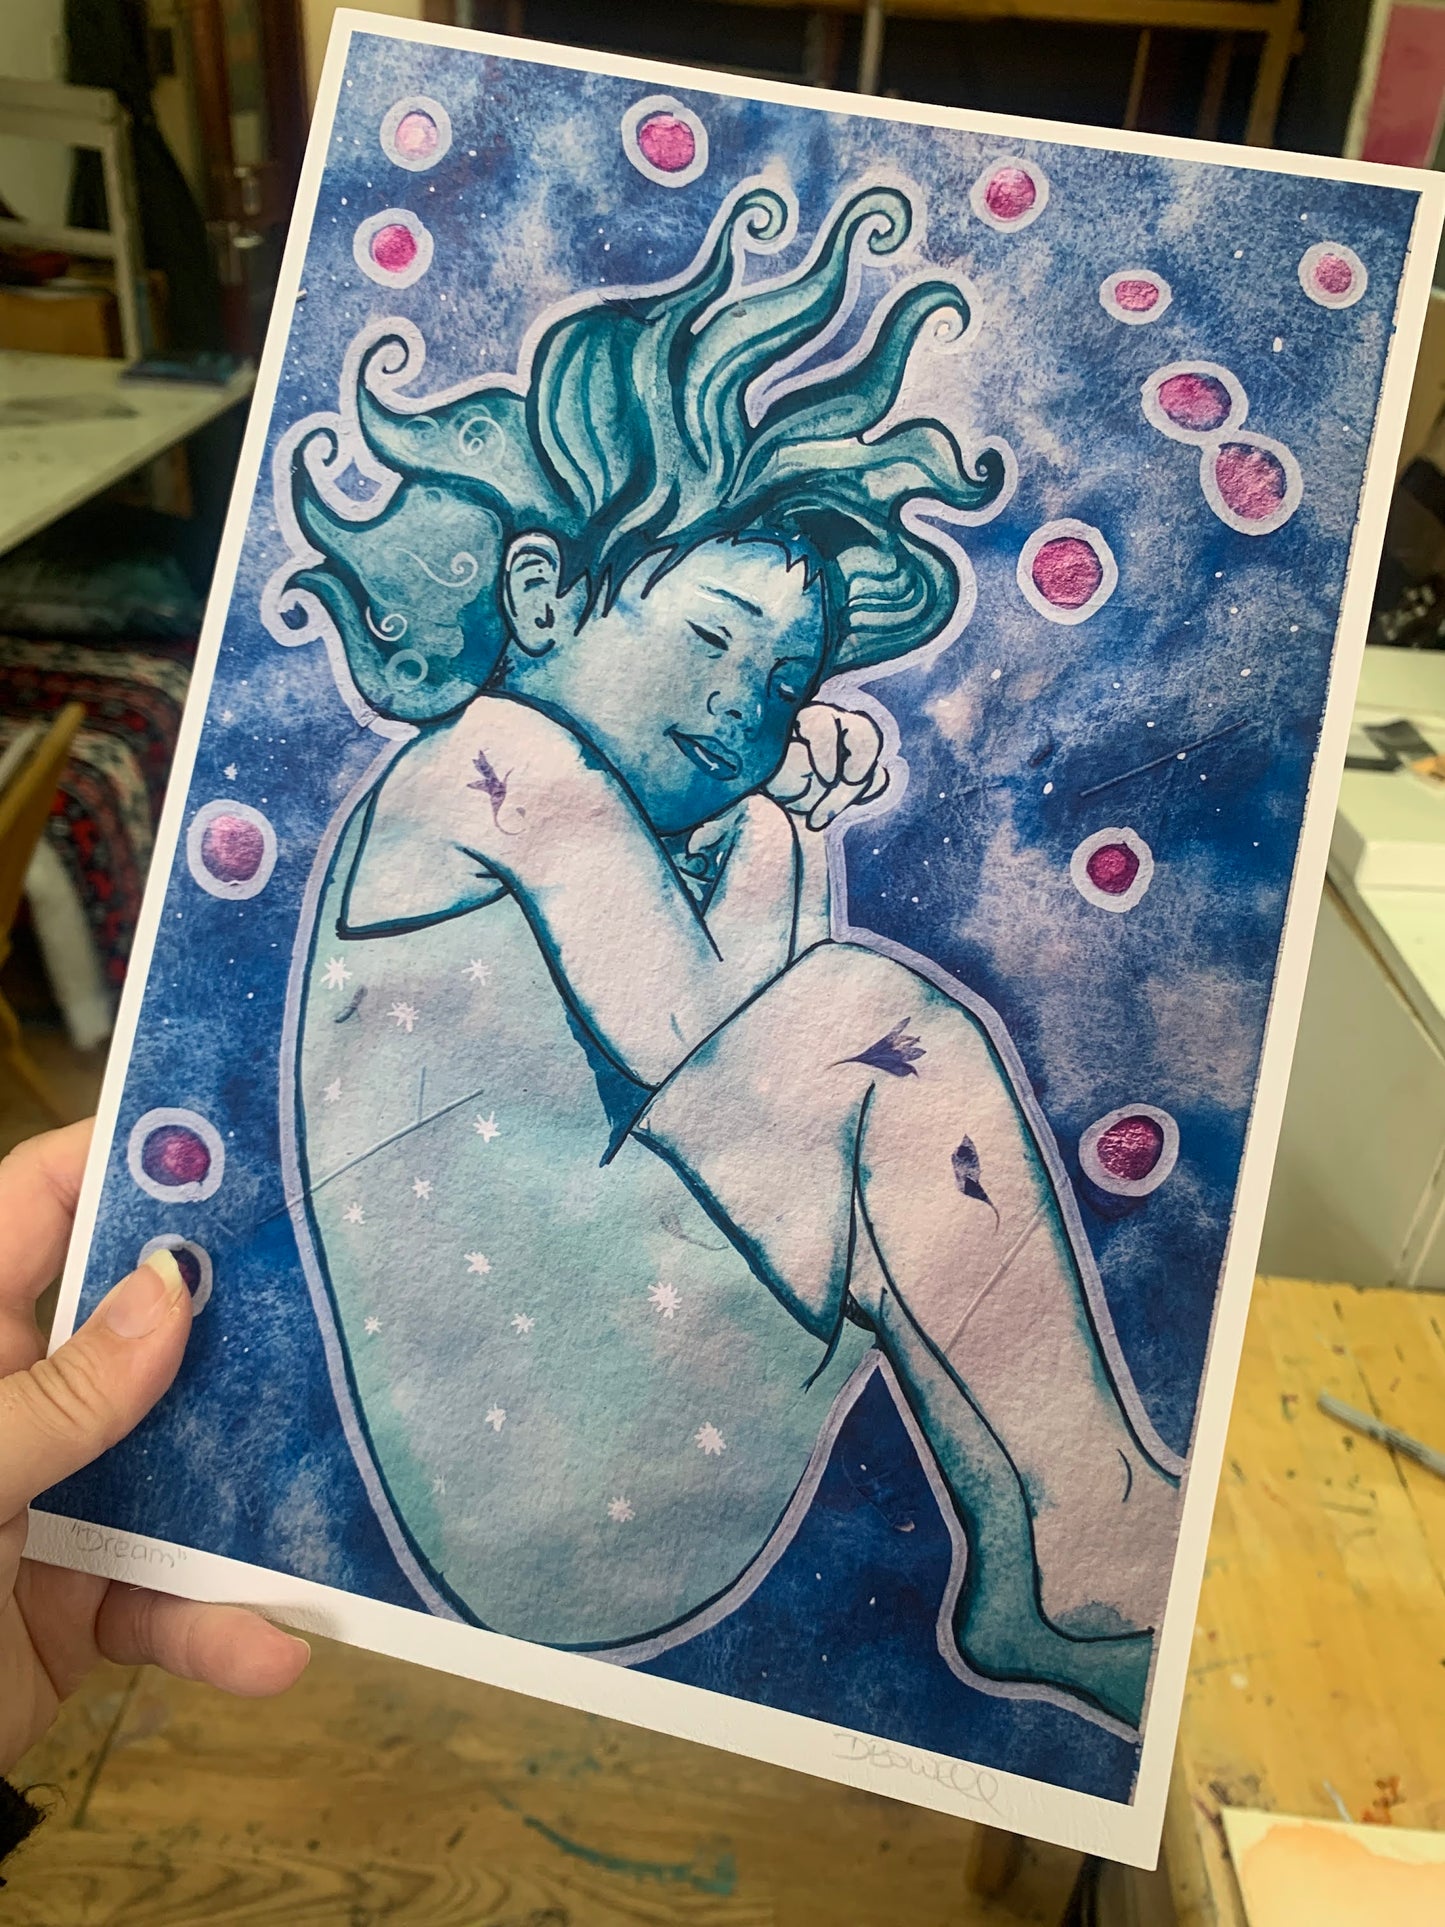 Dream print, by Dianne Bowell, Female Middlesbrough Artist. From Middlesbrough Art Studios Gilkes Street Artists. Contemporary art print, illustration from the snow queen. perfect for Childrens Bedroom wall art. 